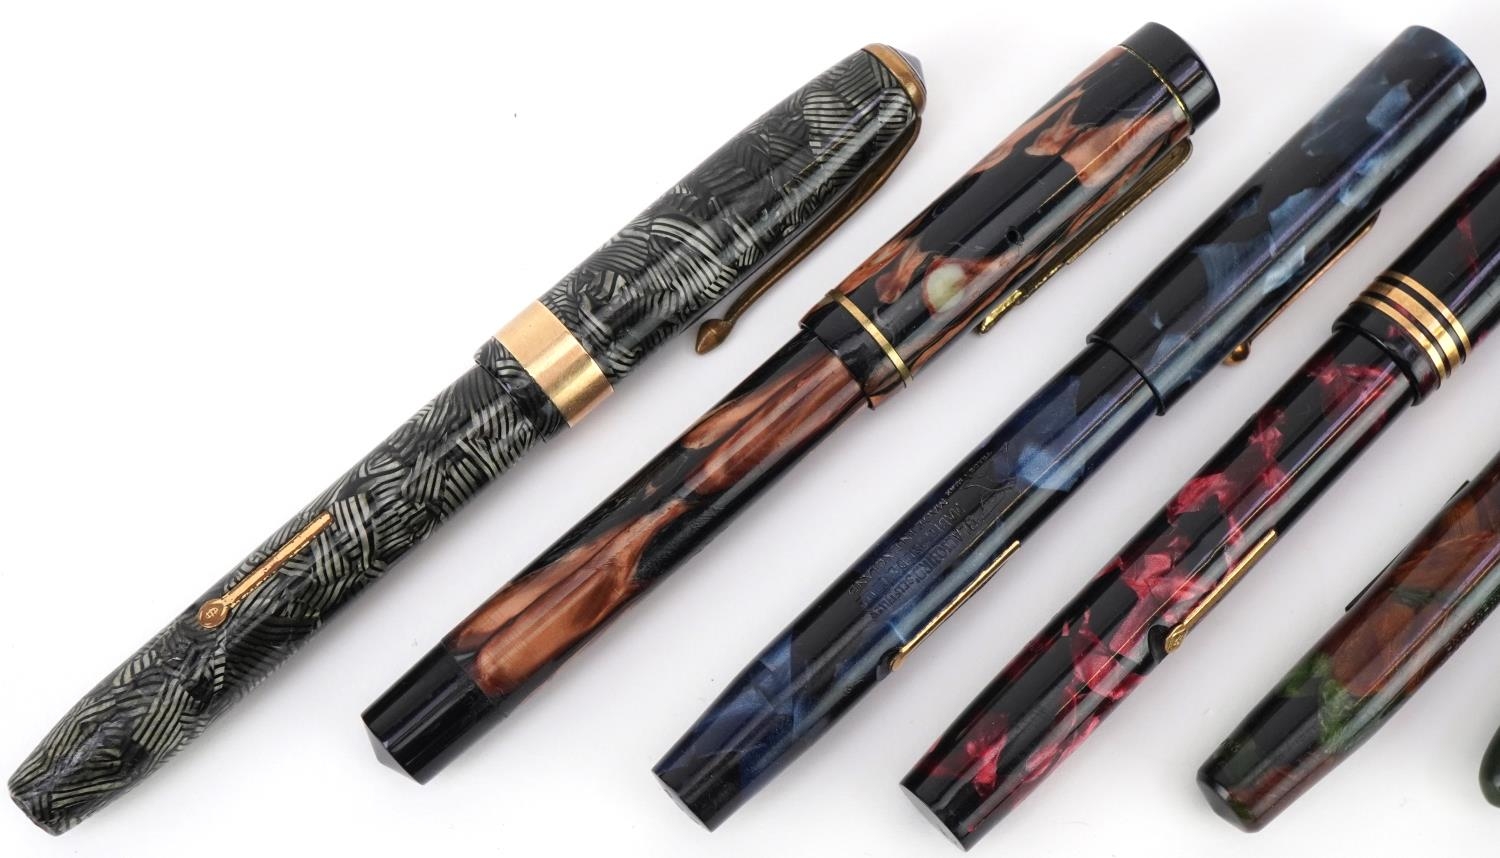 Vintage marbleised fountain pens including Blackbird and Swan - Image 2 of 6